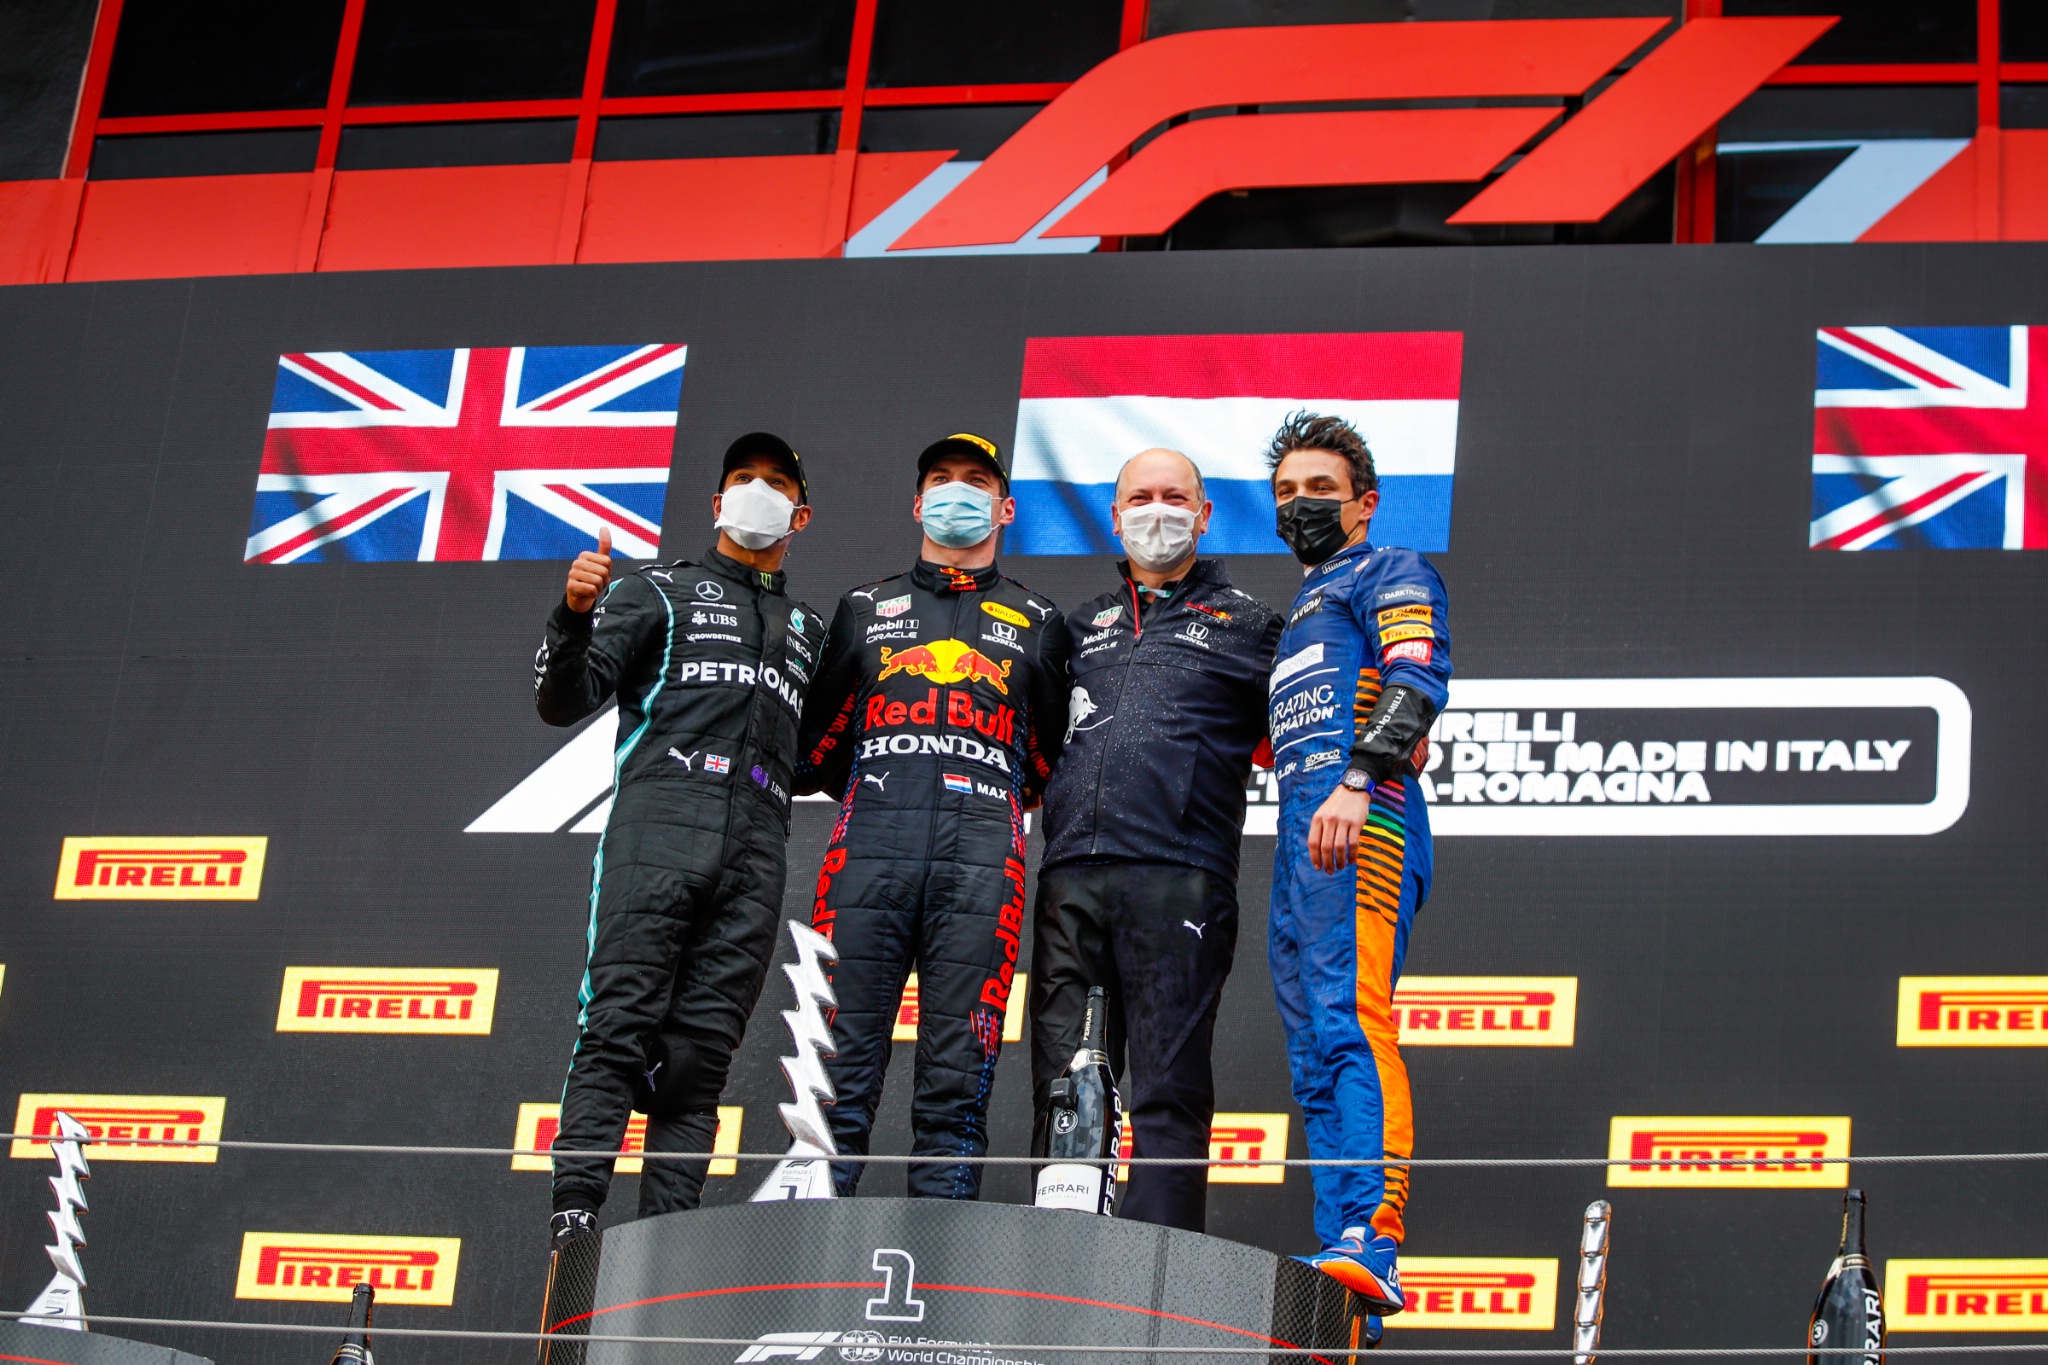 The podium (L to R): Lewis Hamilton (GBR) Mercedes AMG F1, second; Max Verstappen (NLD) Red Bull Racing, race winner; Karl